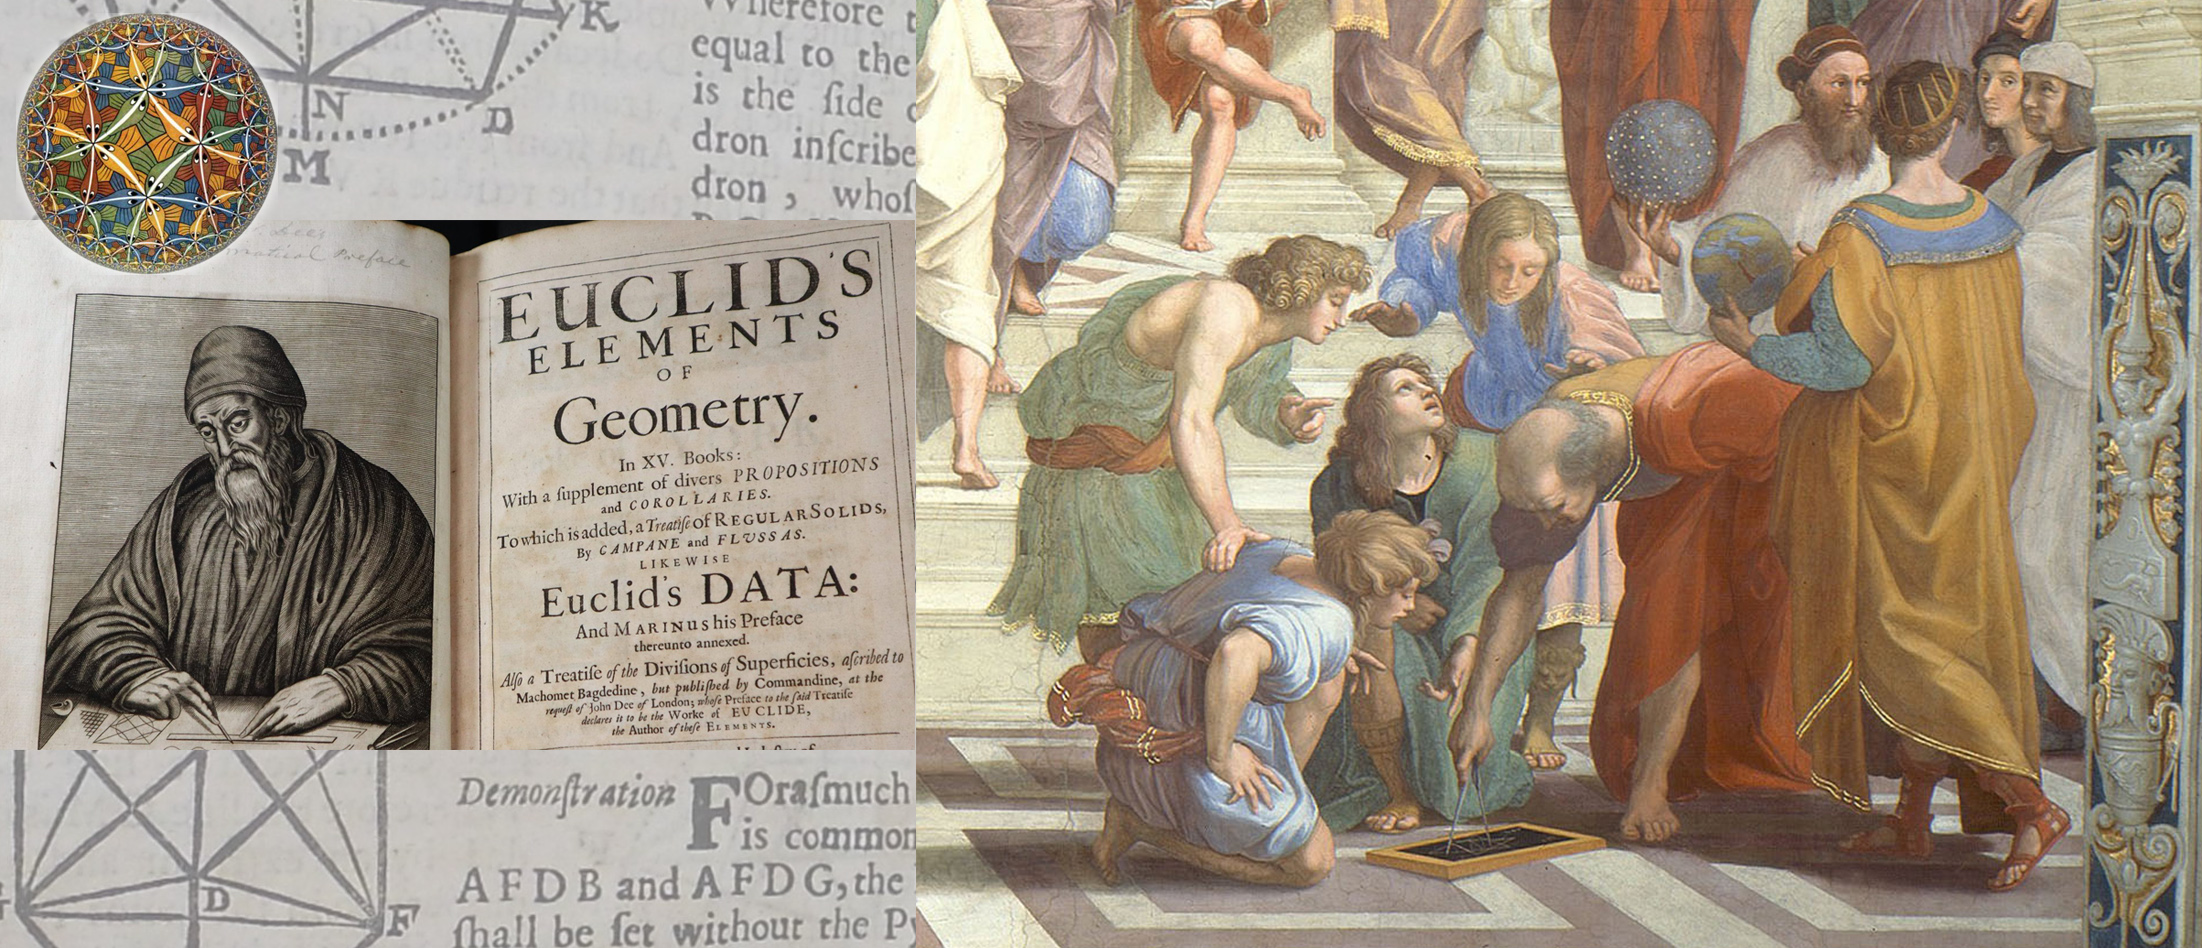 Geometry illustration: Escher cutting, Euclid's geometry, detail from "School of Athens" by Raphael